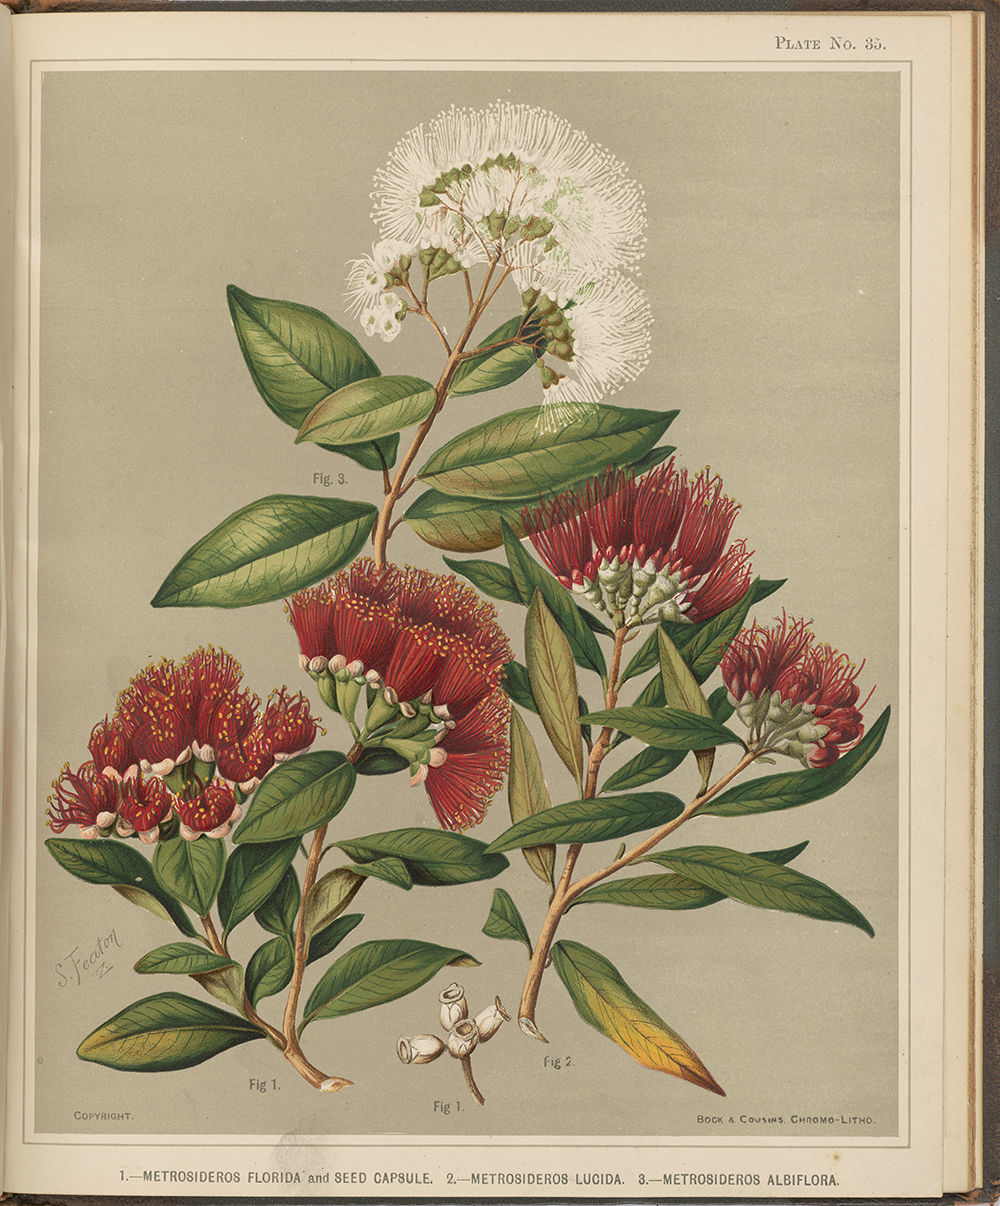 A watercolour painting of parts of a tree's flowers which are clusters of long stems, some are red and some are white.